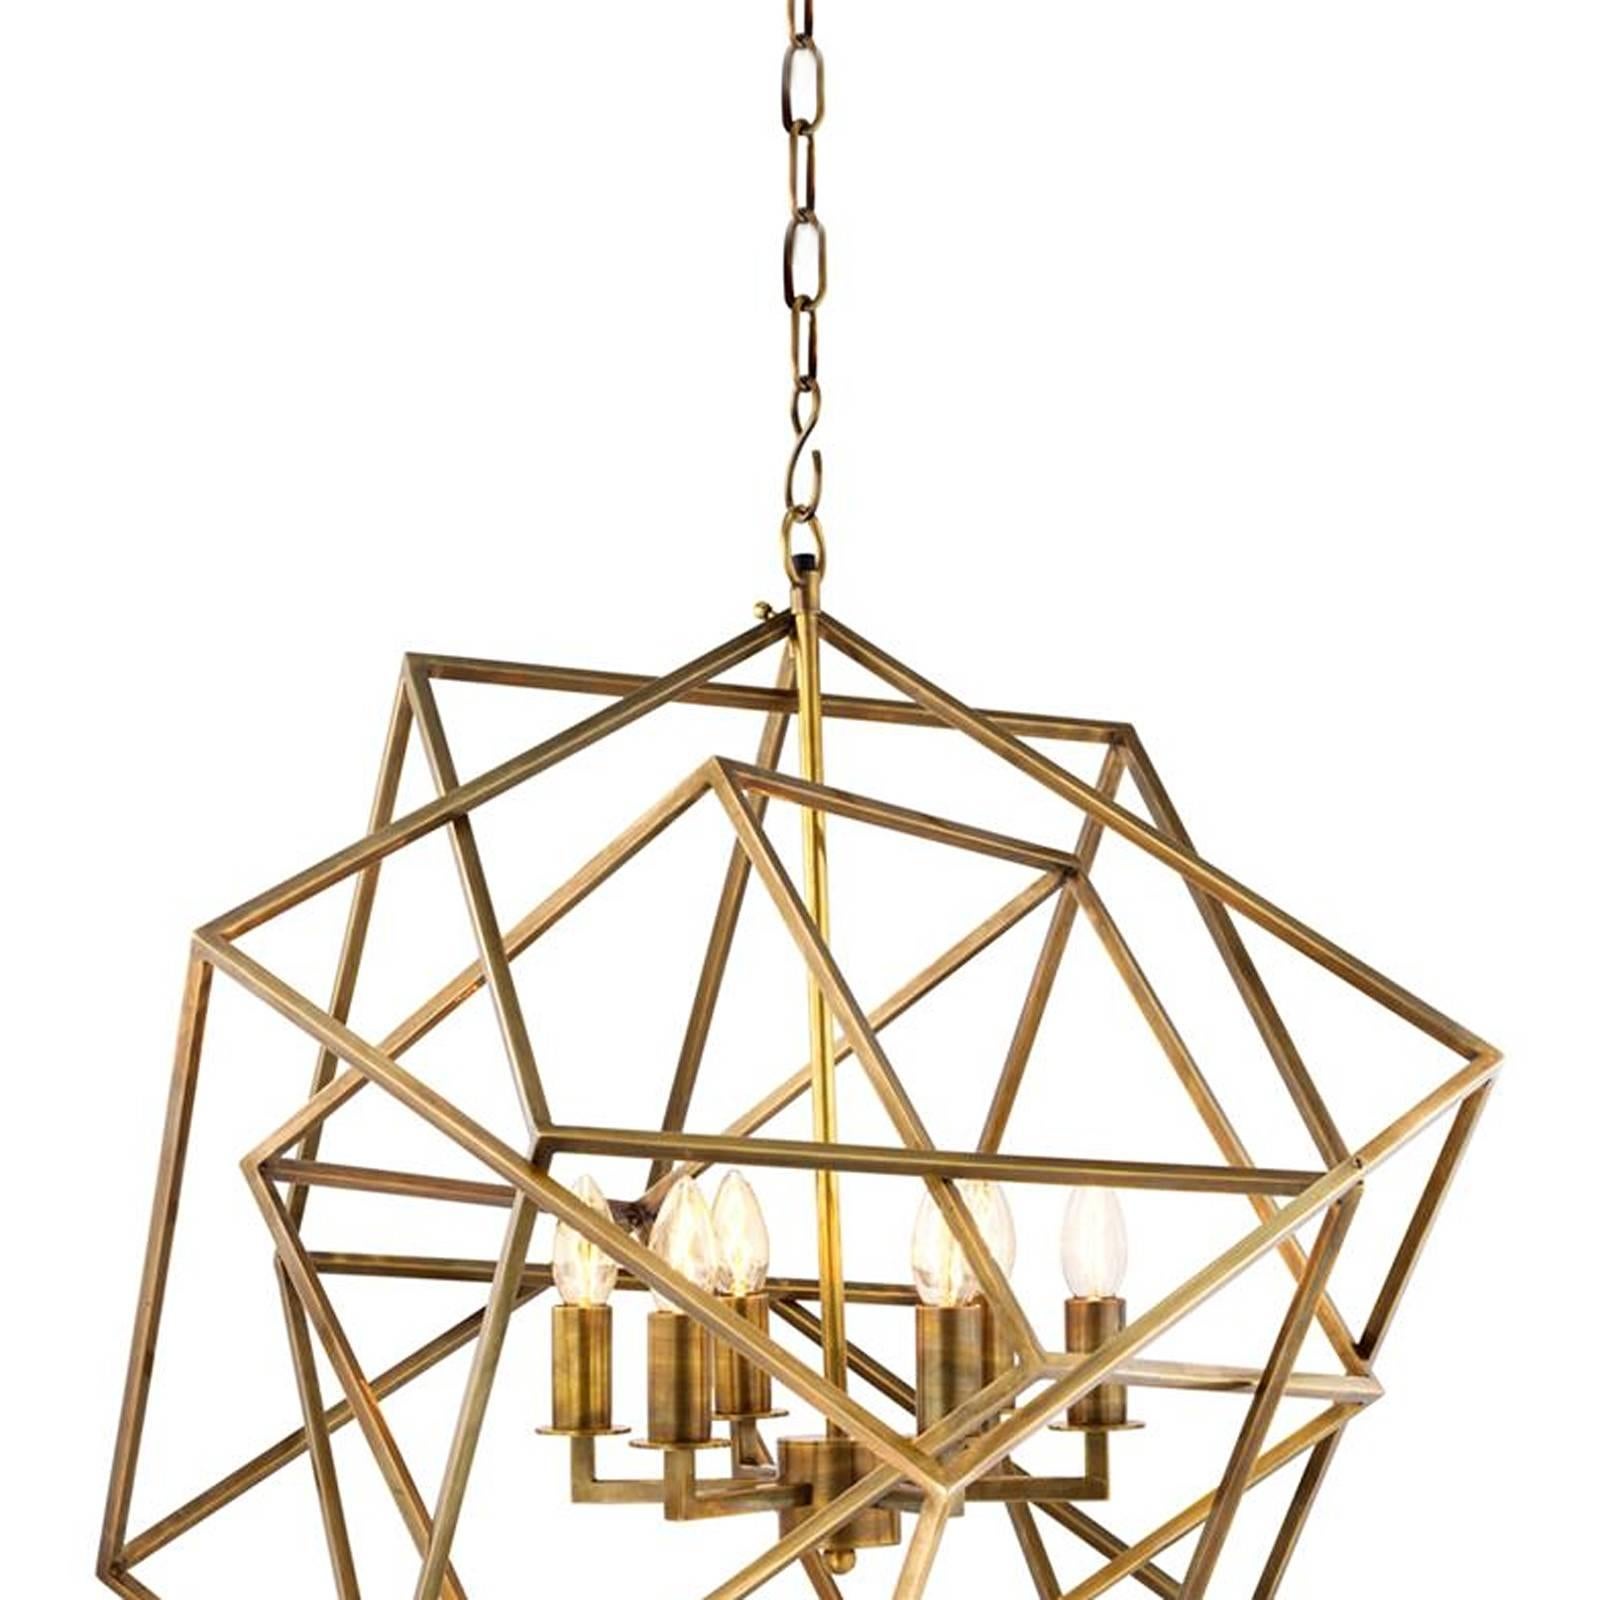 Chandelier so cube with structure in vintage
brass finish. Six bulbs lamp holder type E14,
max 40 Watts. Bulbs not included. Adjustable
chain: 150cm.
Also available in nickel finish.
